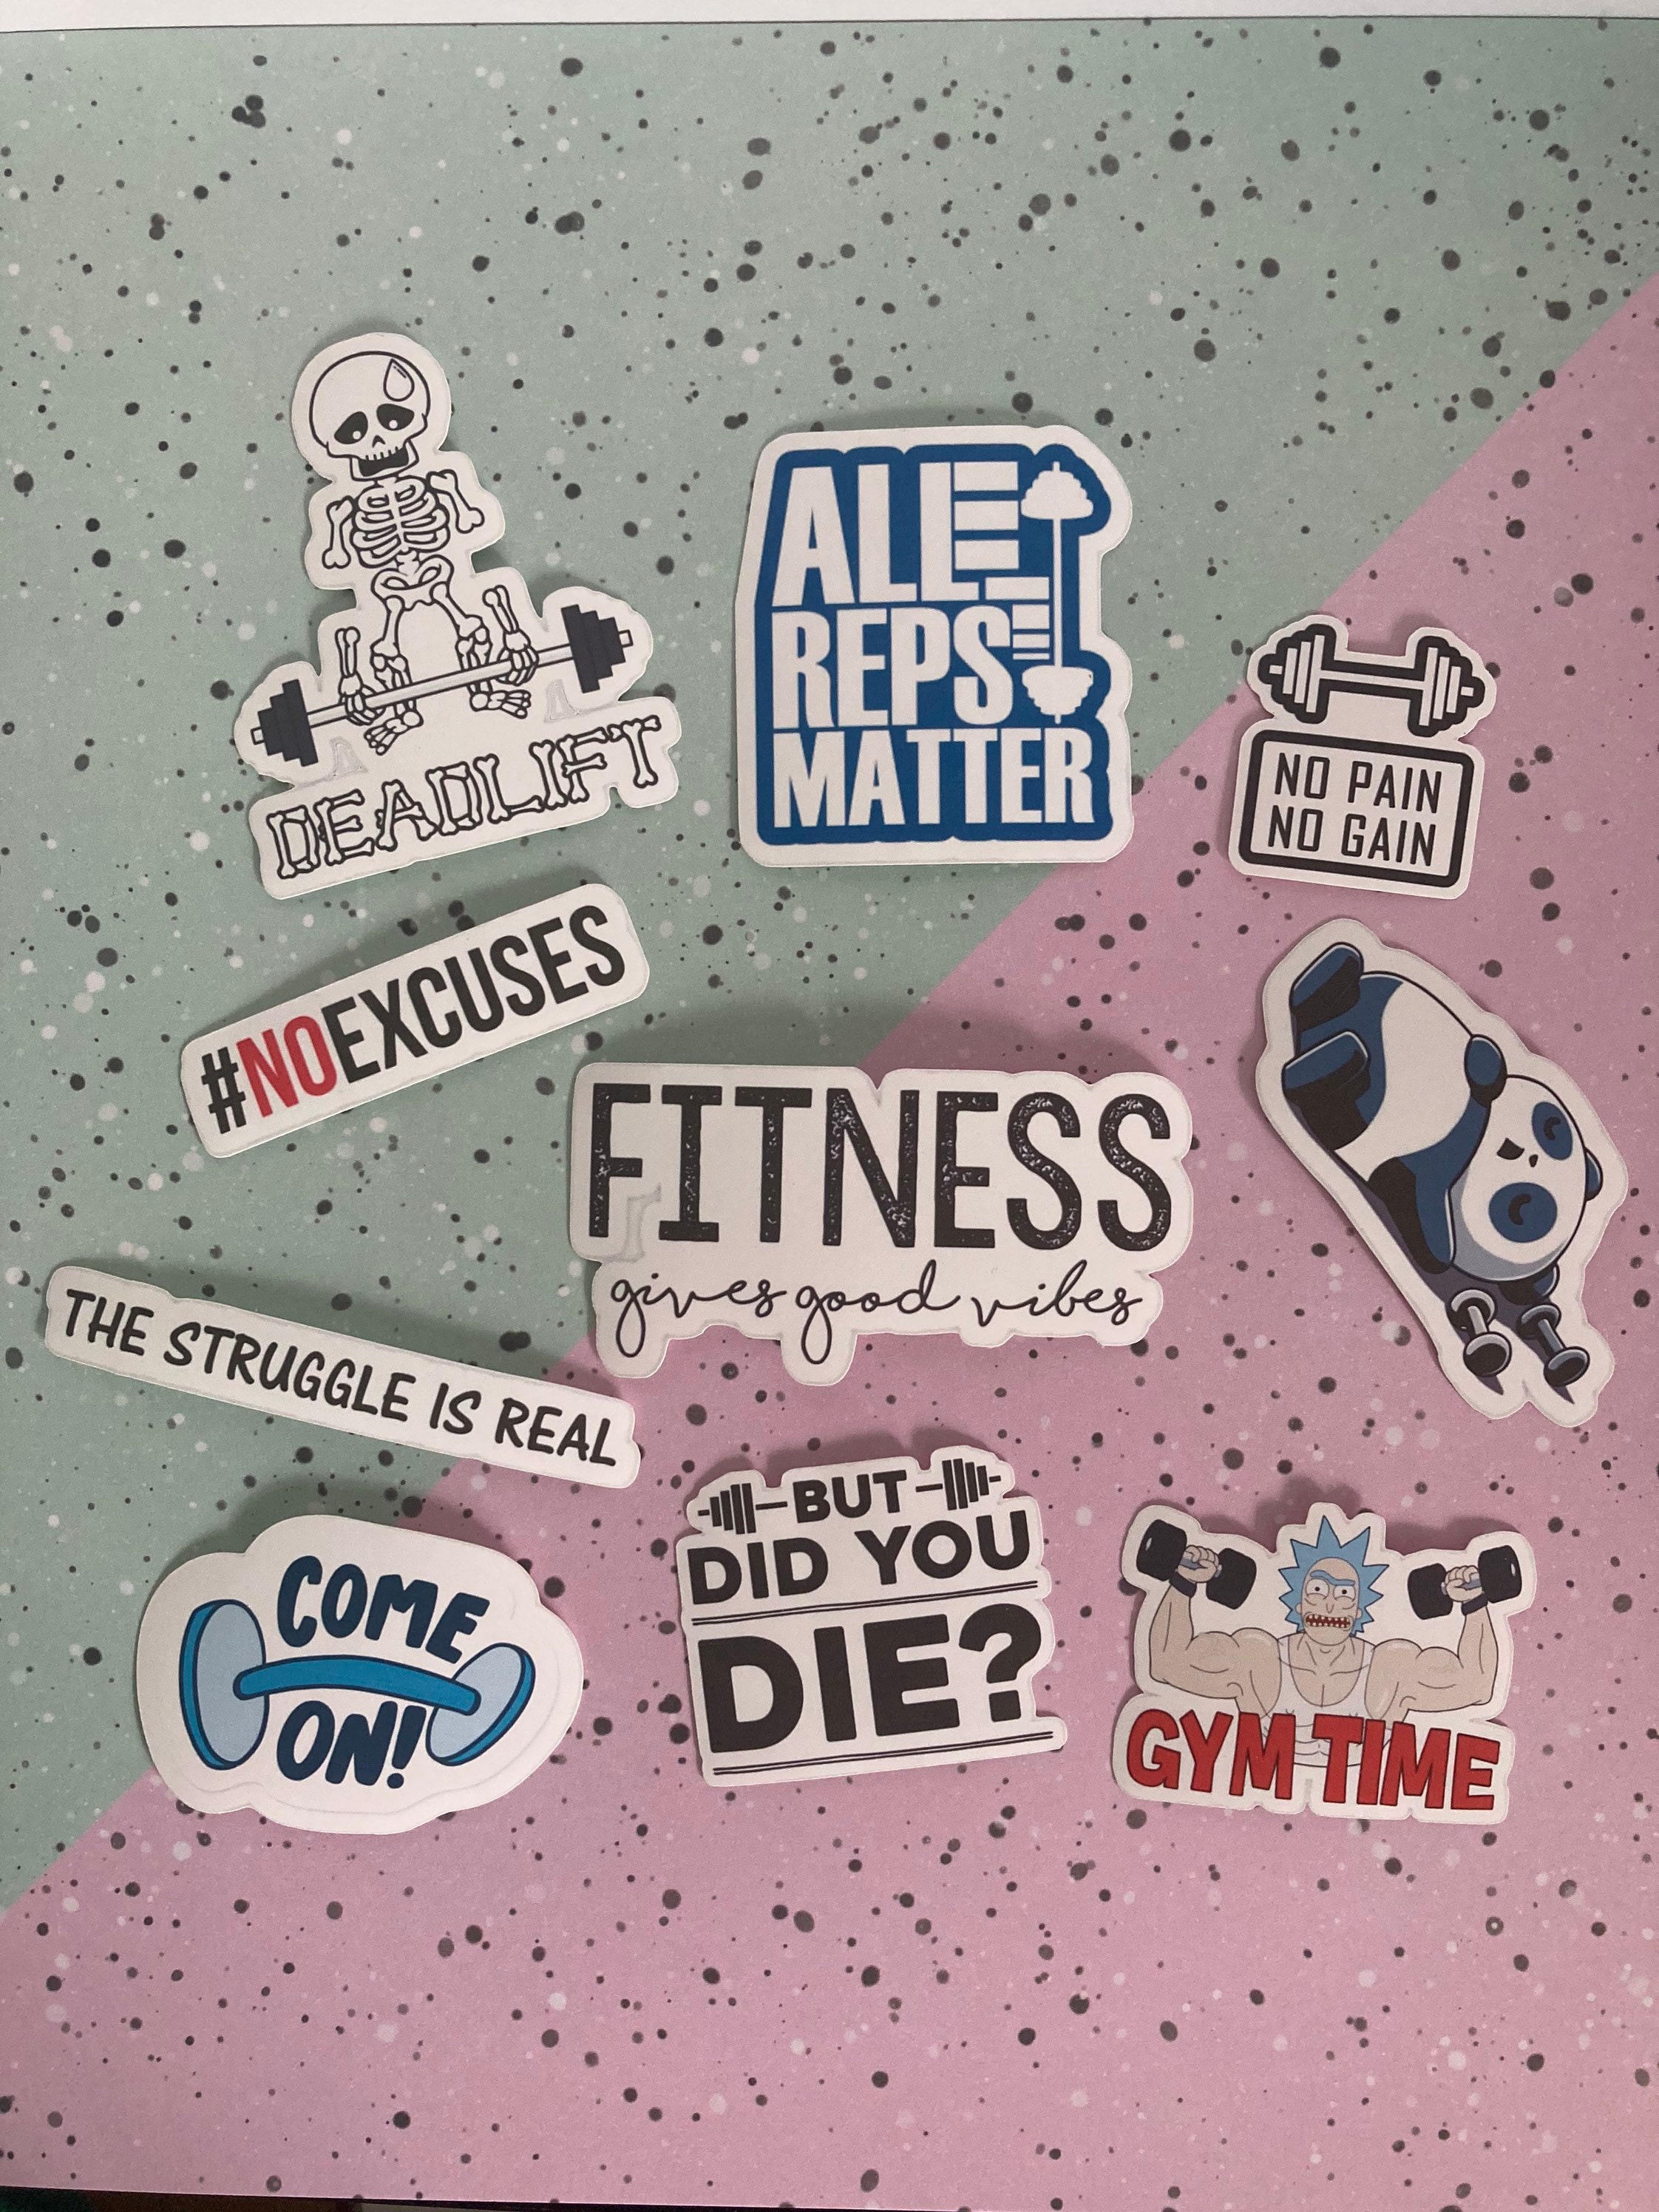 Gym Goals Motivation Straight Happiness - Best Fitness Gifts - Funny Gym - Funny  Gym Lover Gift - Sticker